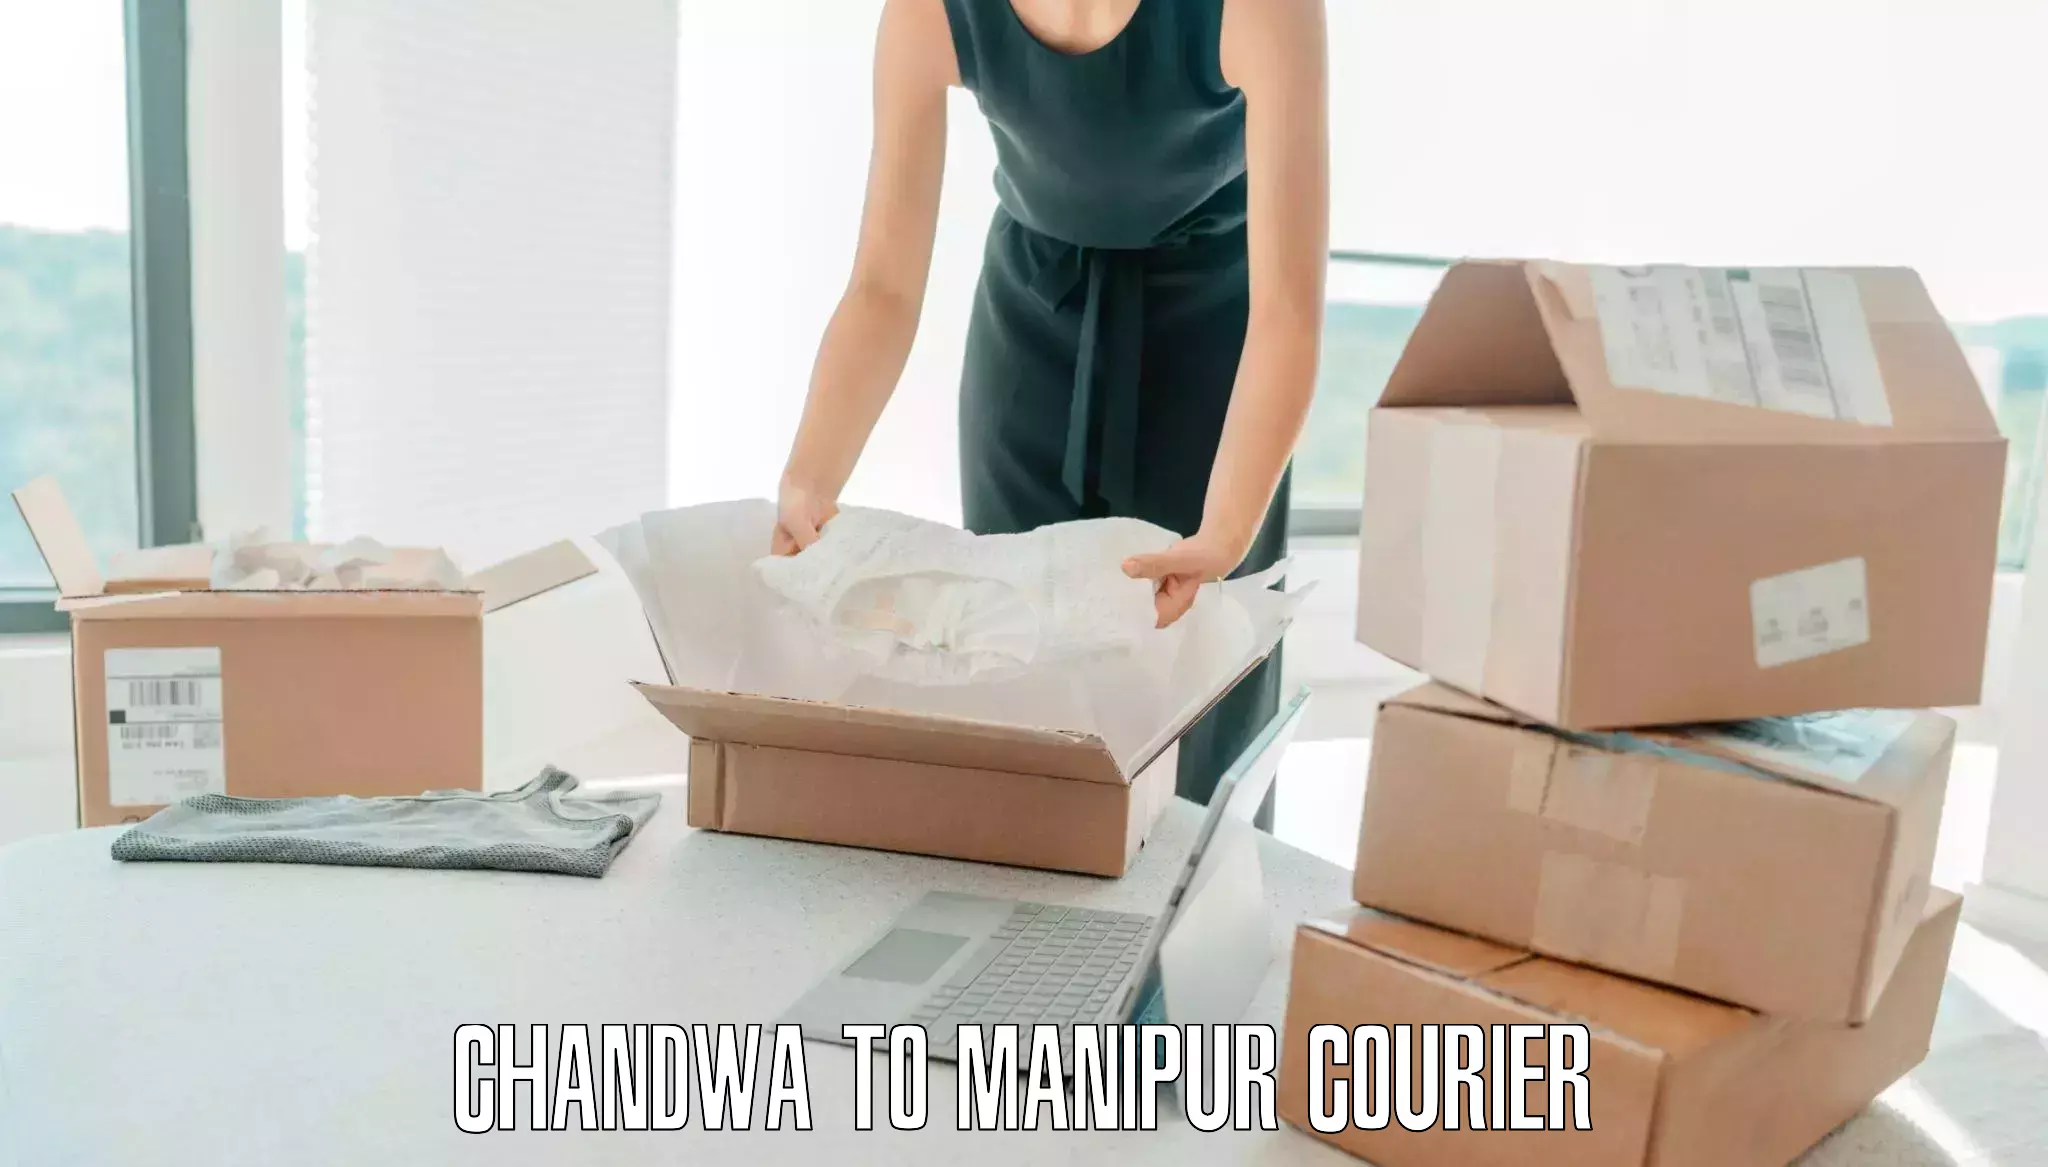 Express luggage delivery Chandwa to Chandel